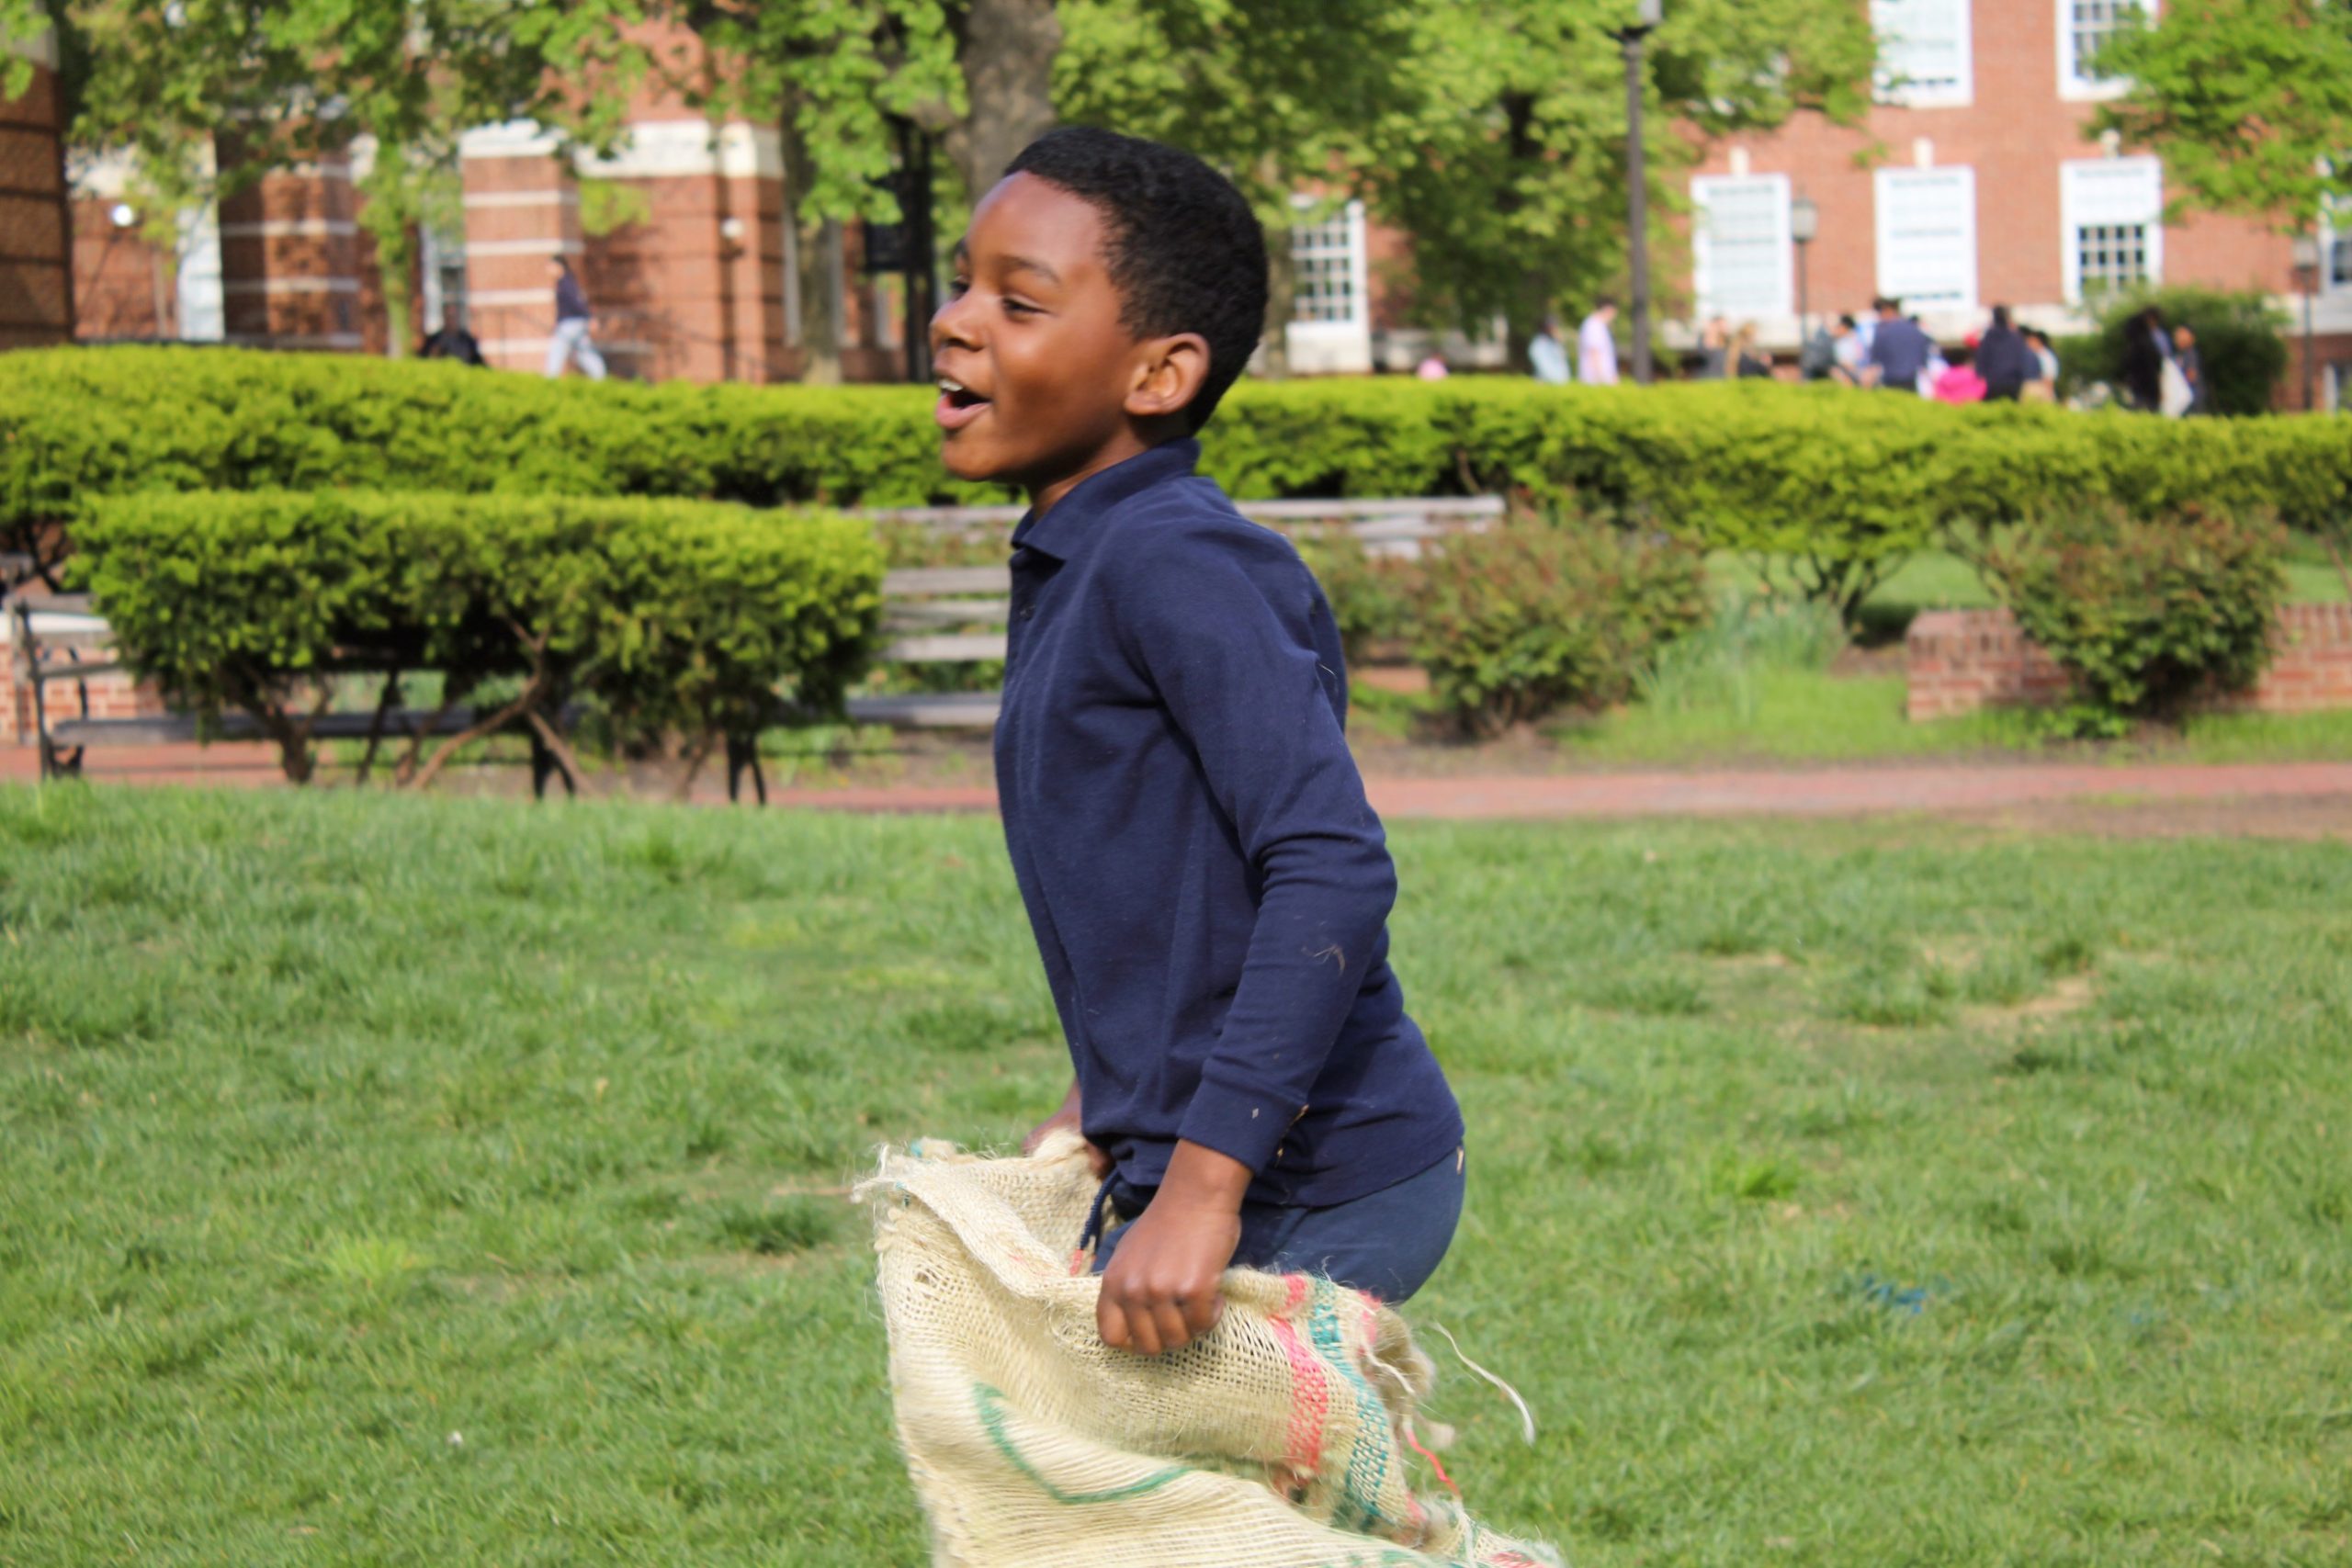 Candid shot of a tutee smiling while sack racing at the 2023 field day